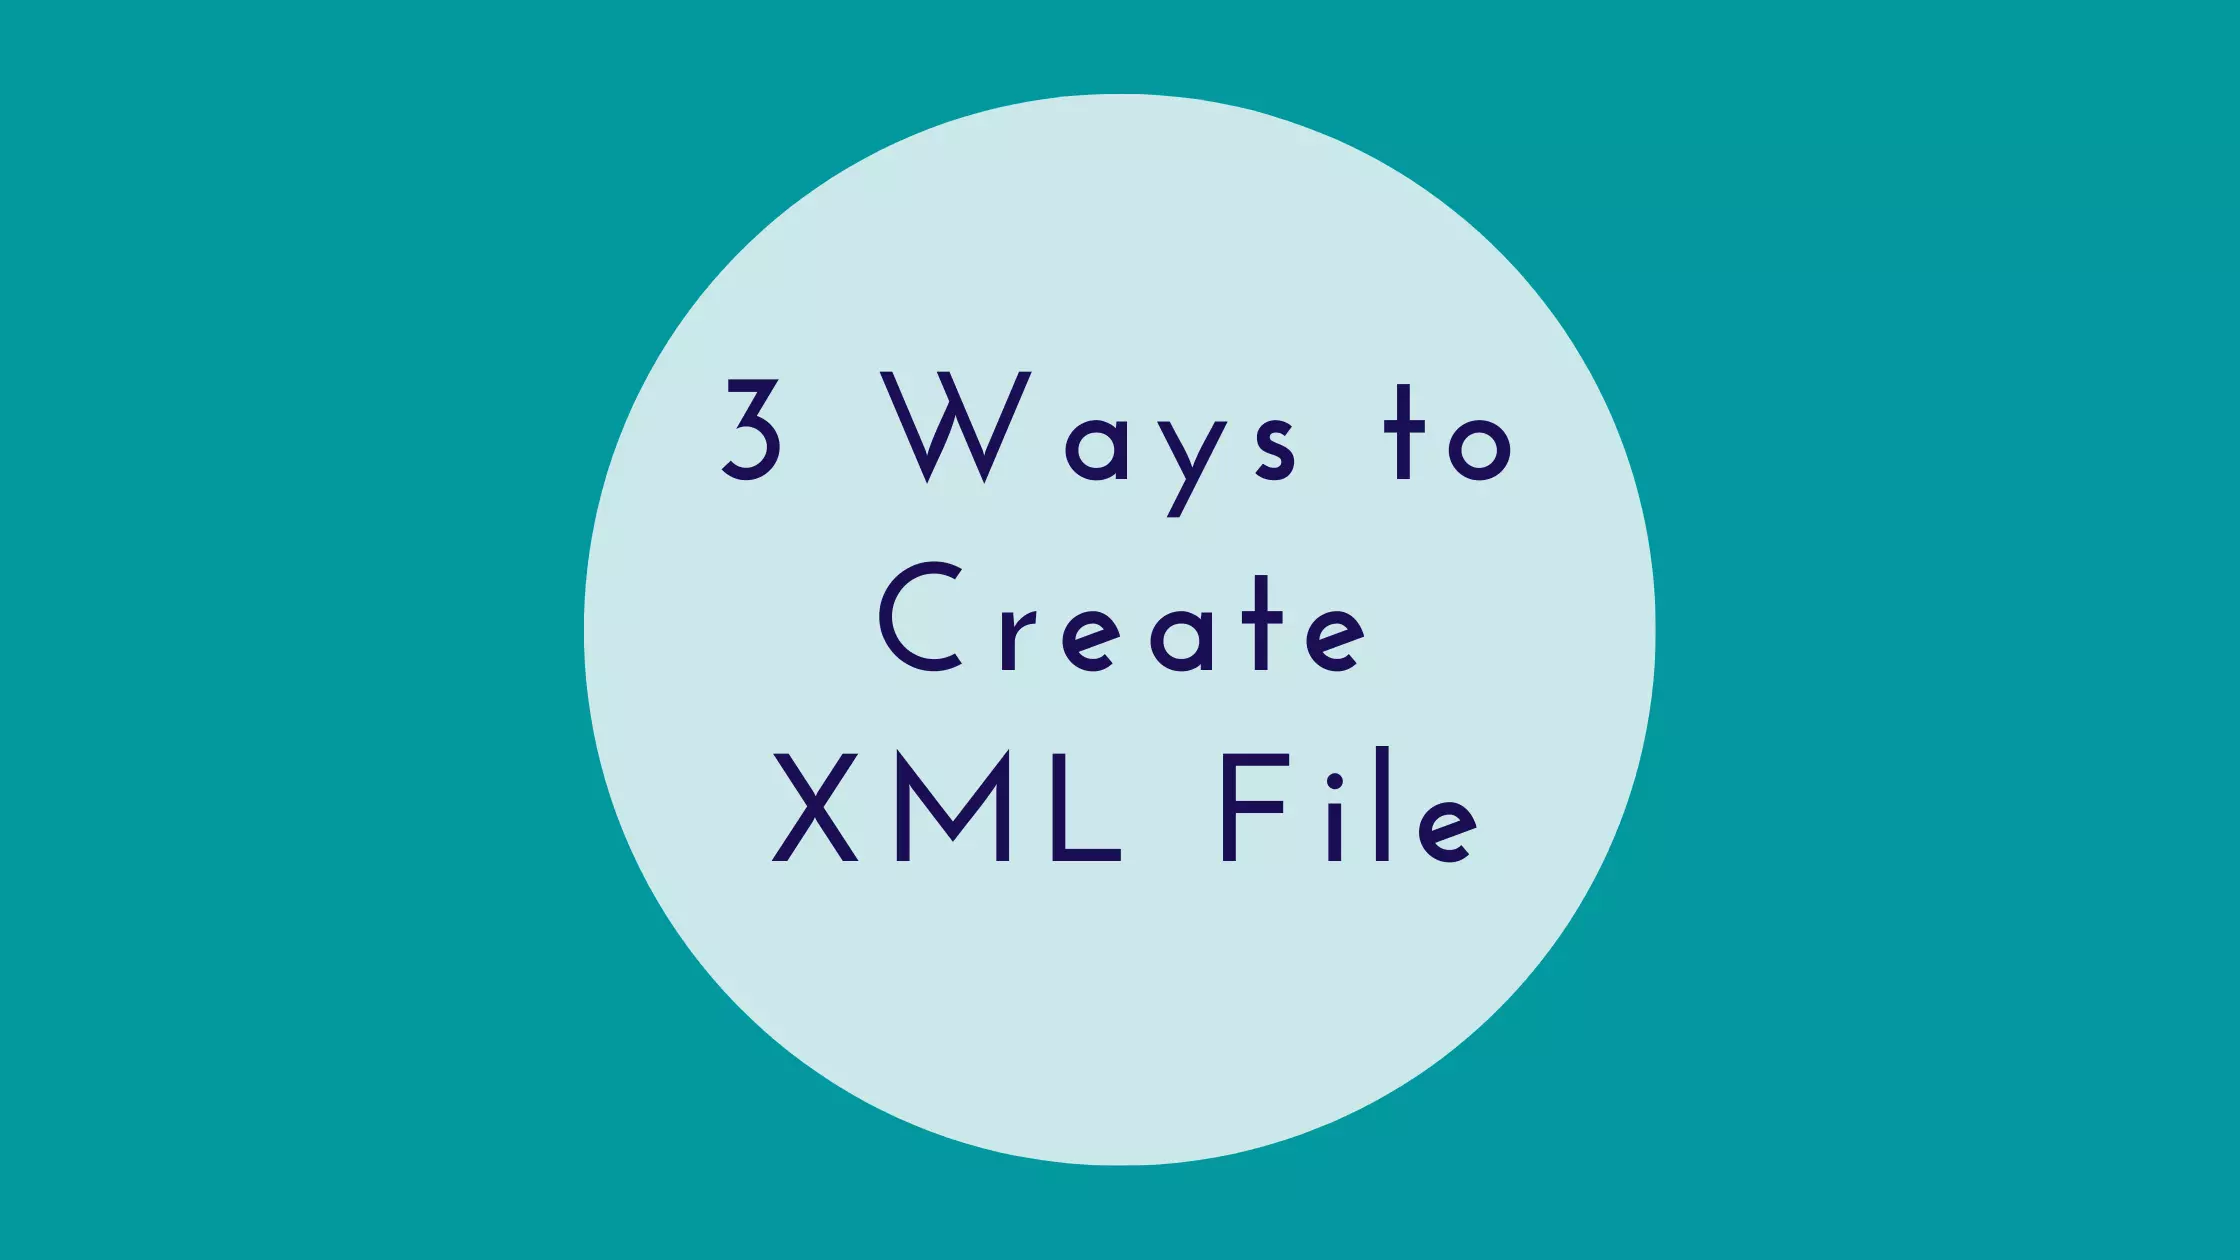 How to create XML File in a few Simple Steps for Beginners